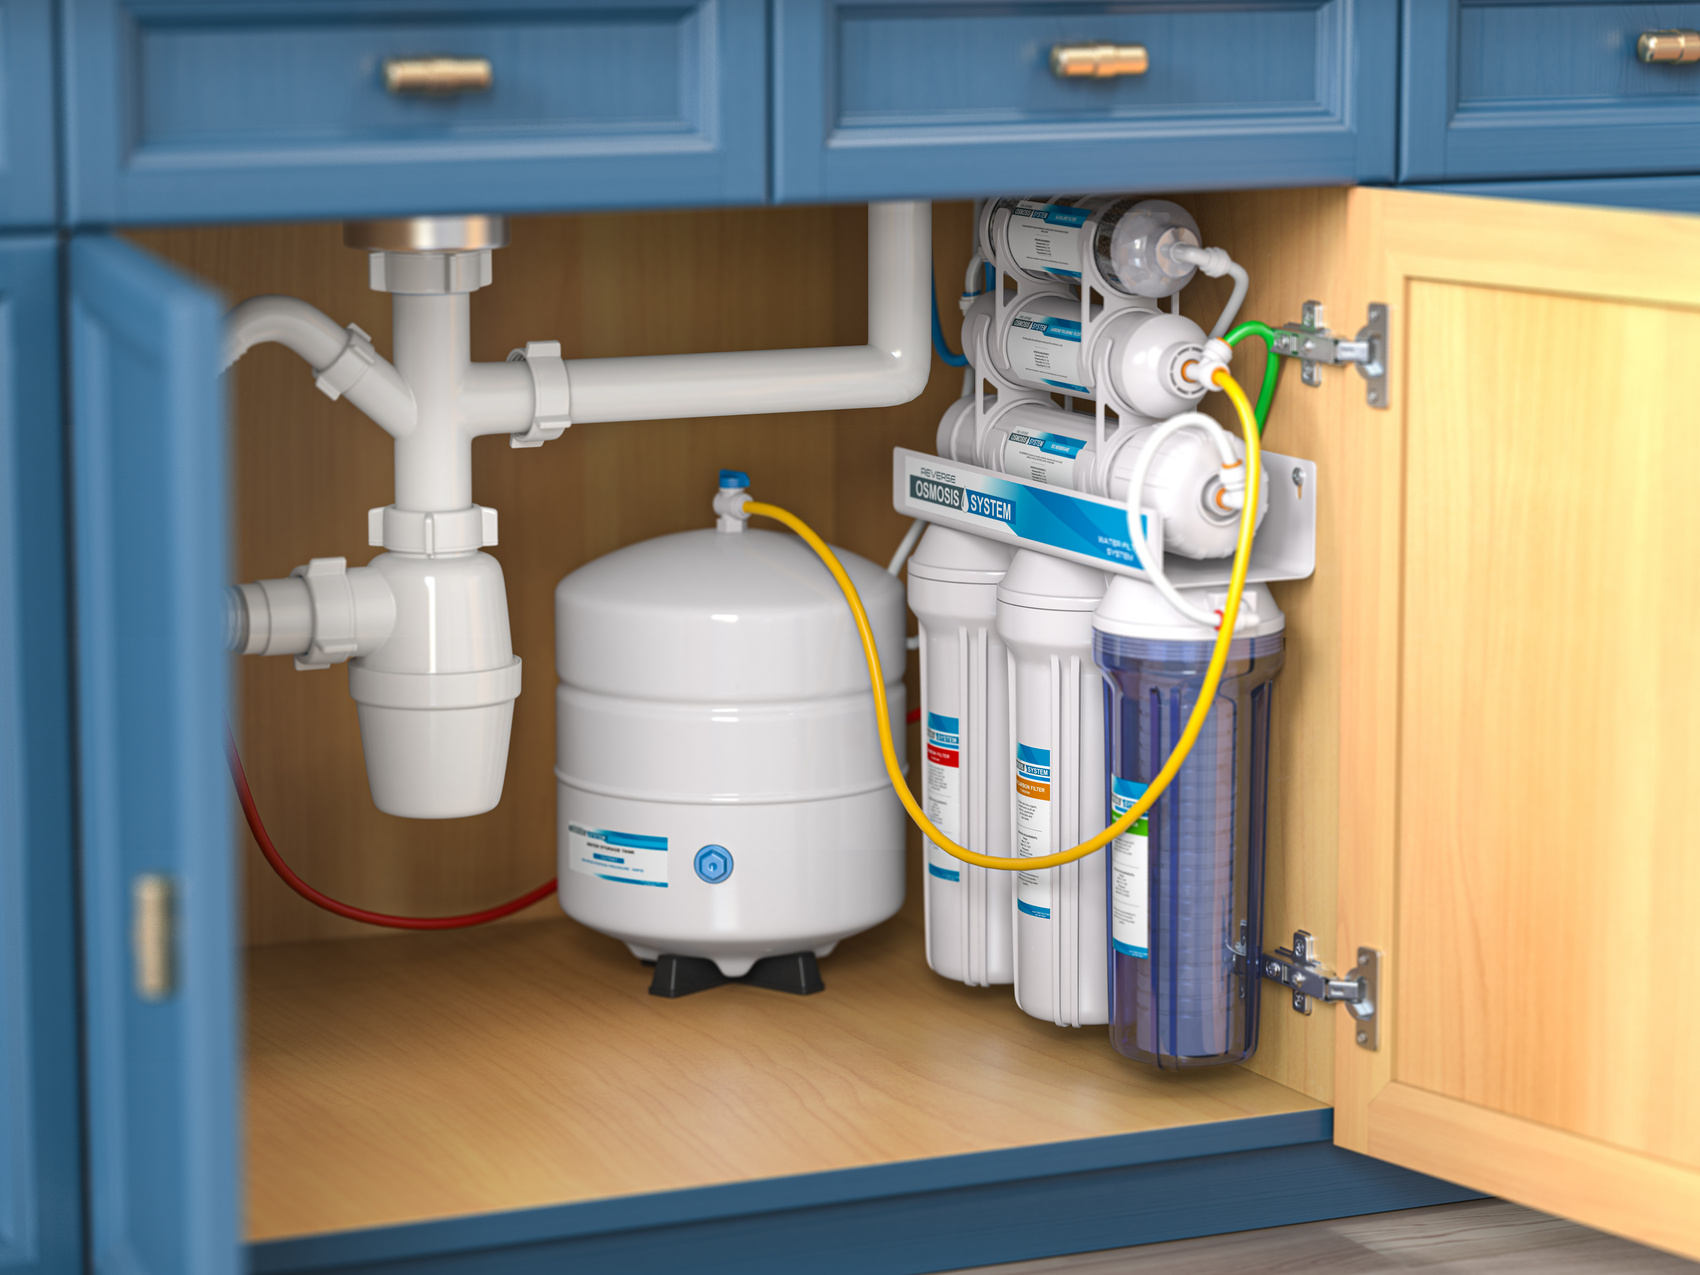 Reverse osmosis water purification system under sink in a kitchaen. Water cleaning system installation.